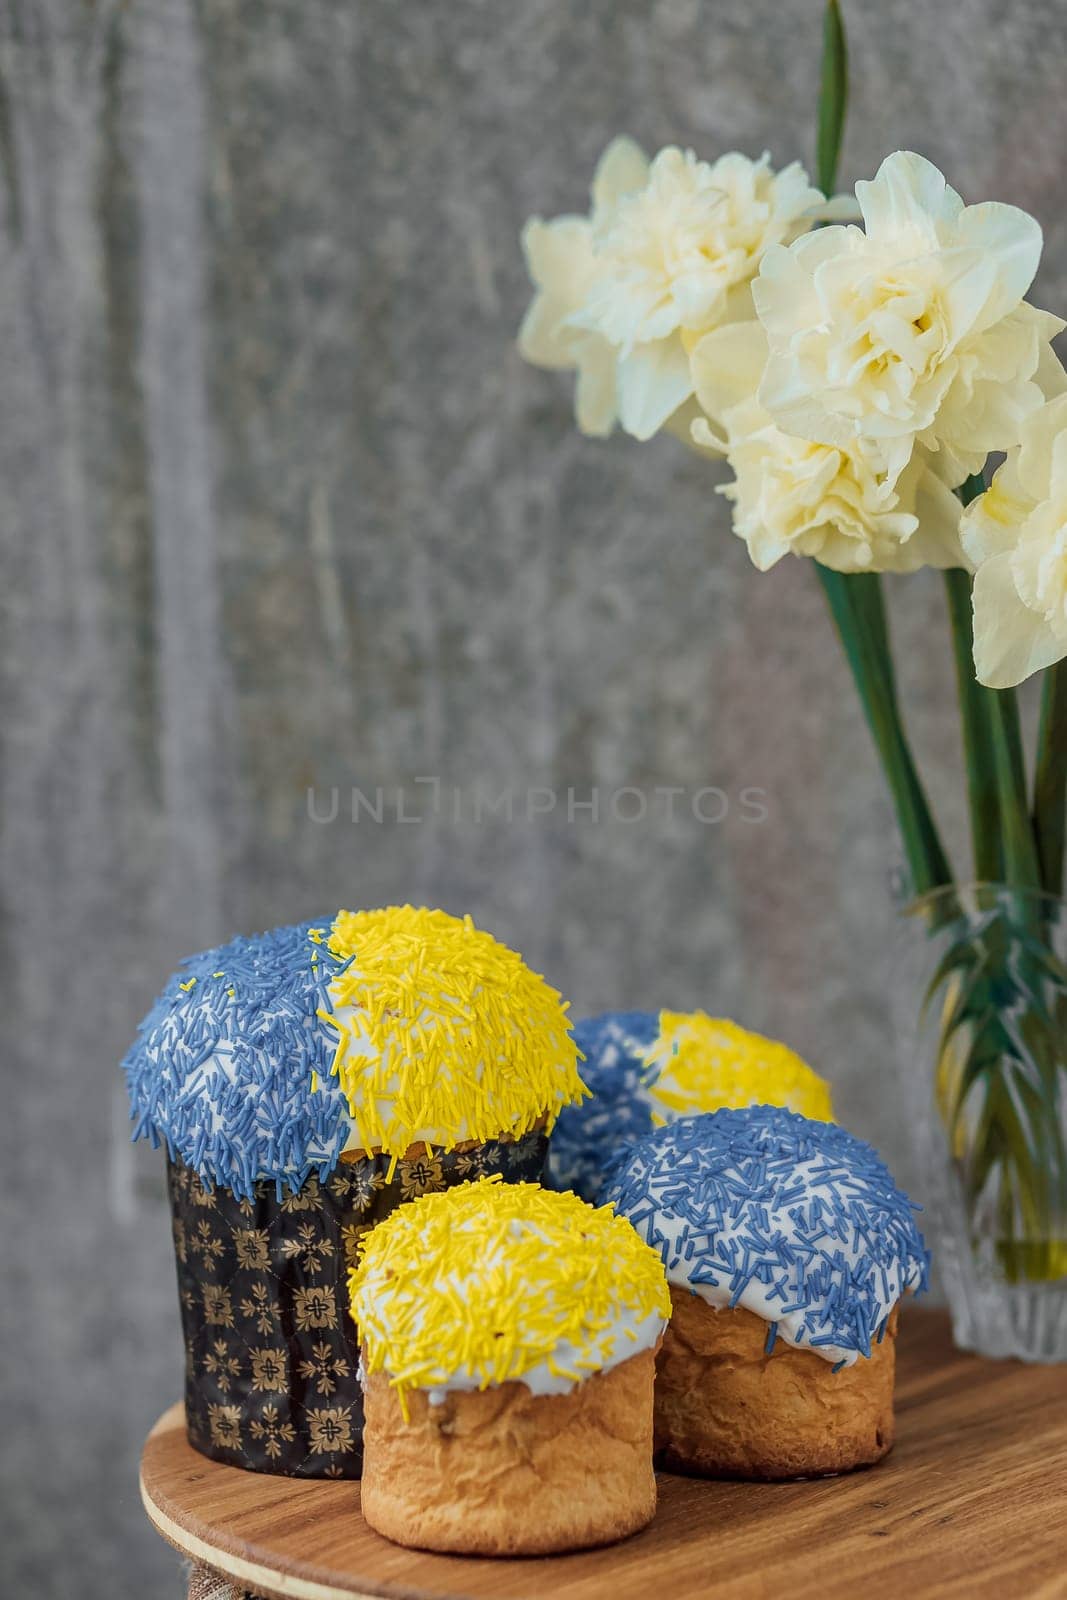 Delicious Easter cakes in the colors of the flag of Ukraine, yellow-blue colored Easter eggs on a wooden table with flowers in the background. place for text. selective focus by Anyatachka